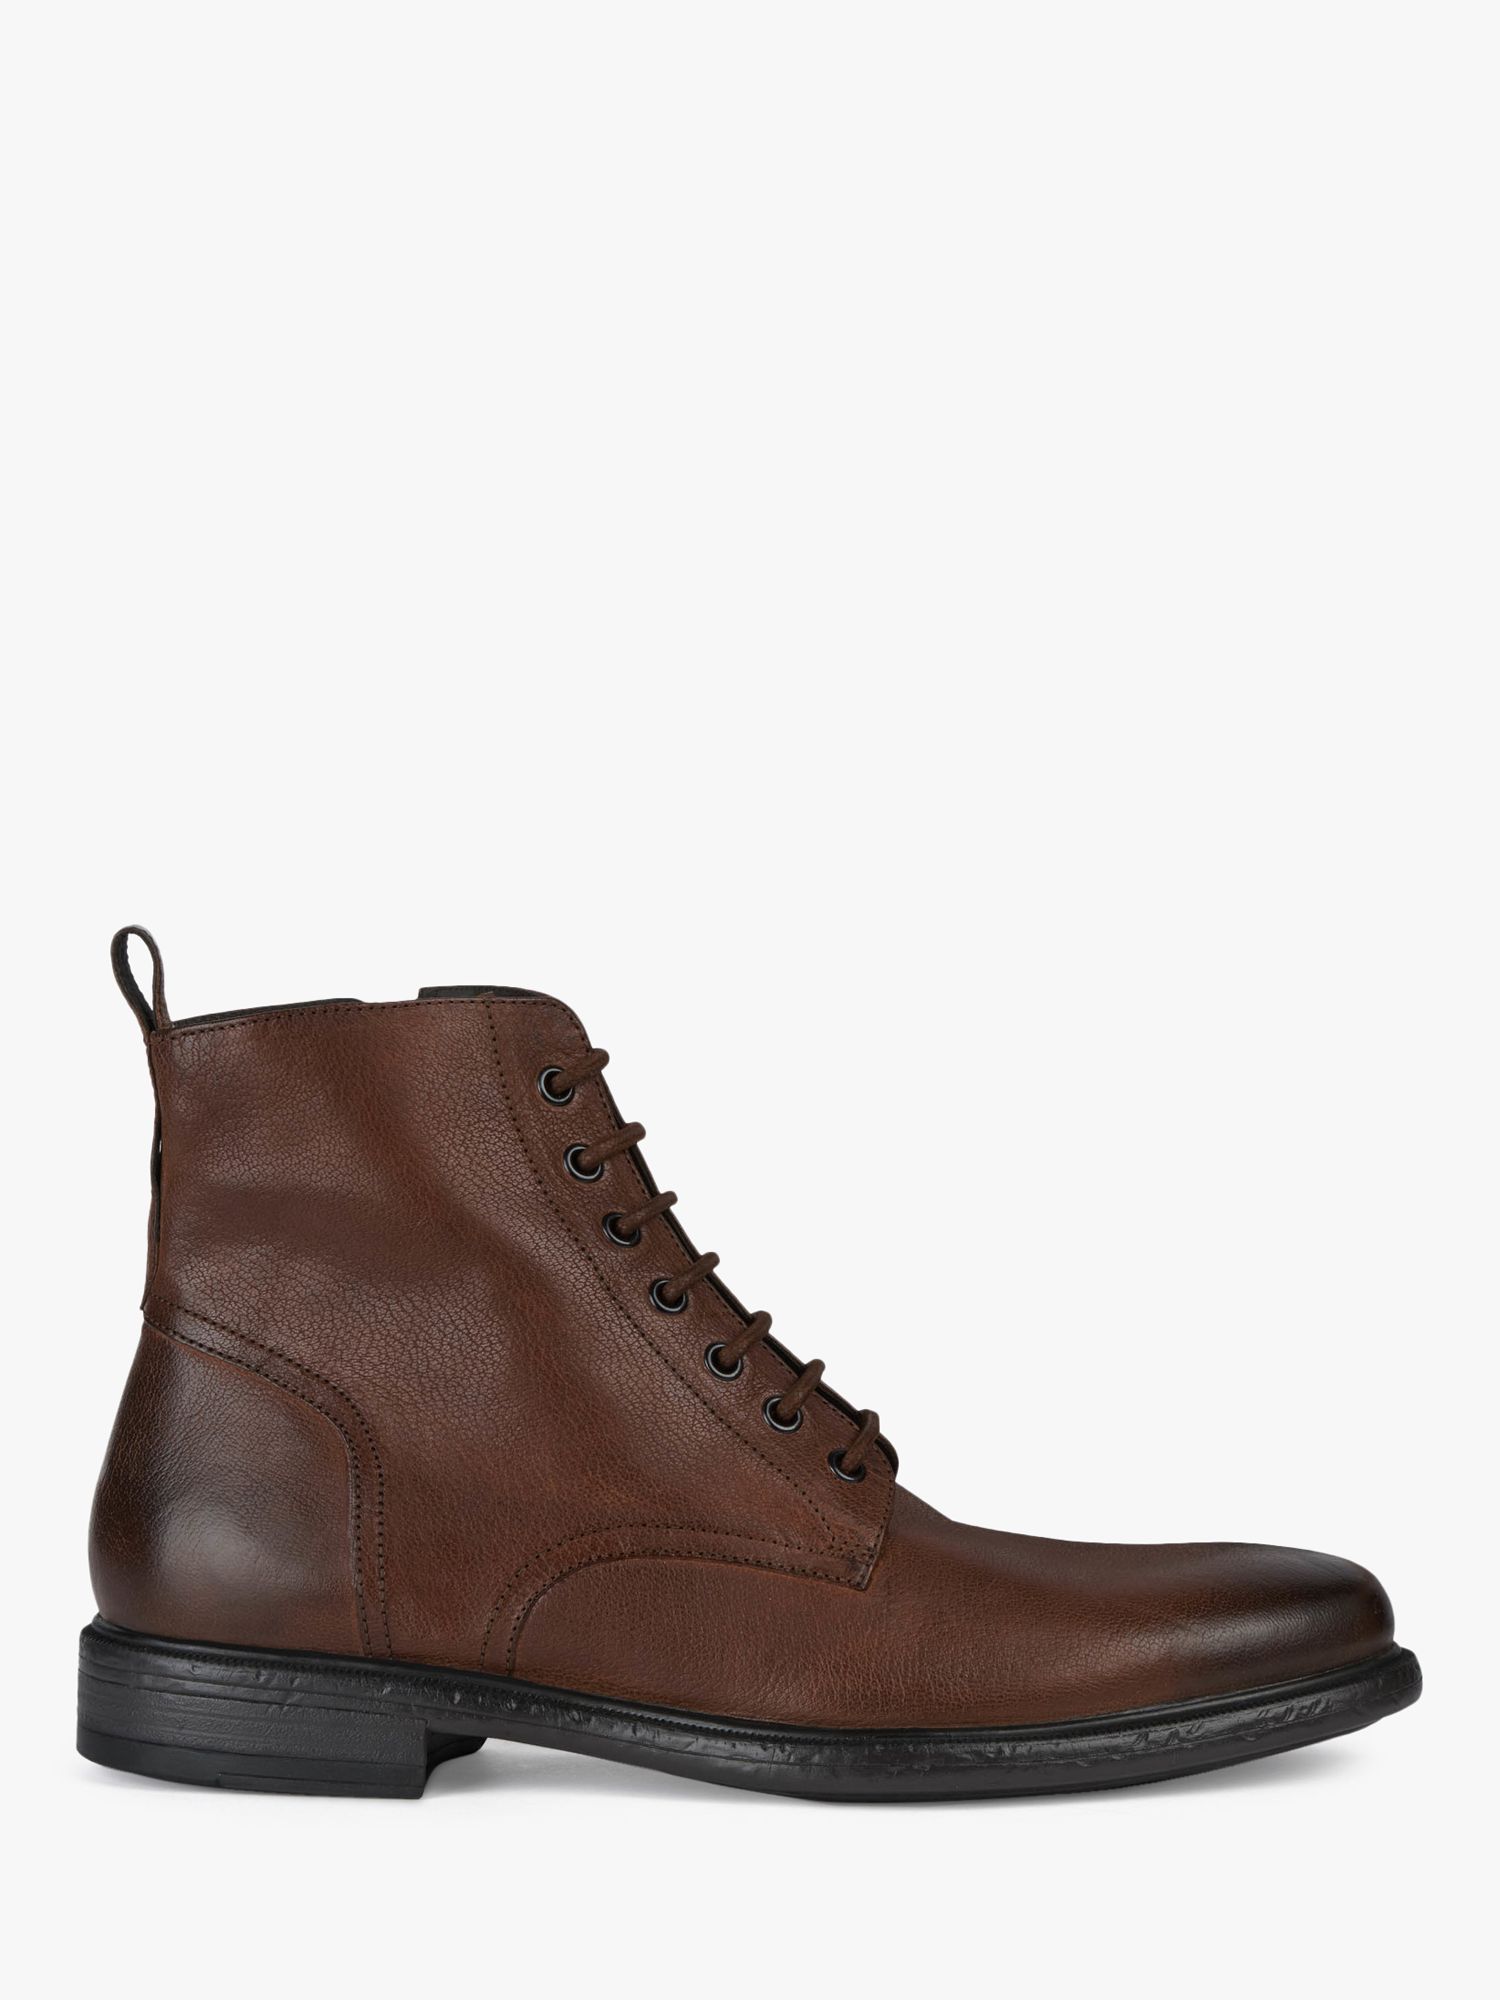 Geox Terence D Leather Lace Up Boots, Dark Cognac at John Lewis & Partners